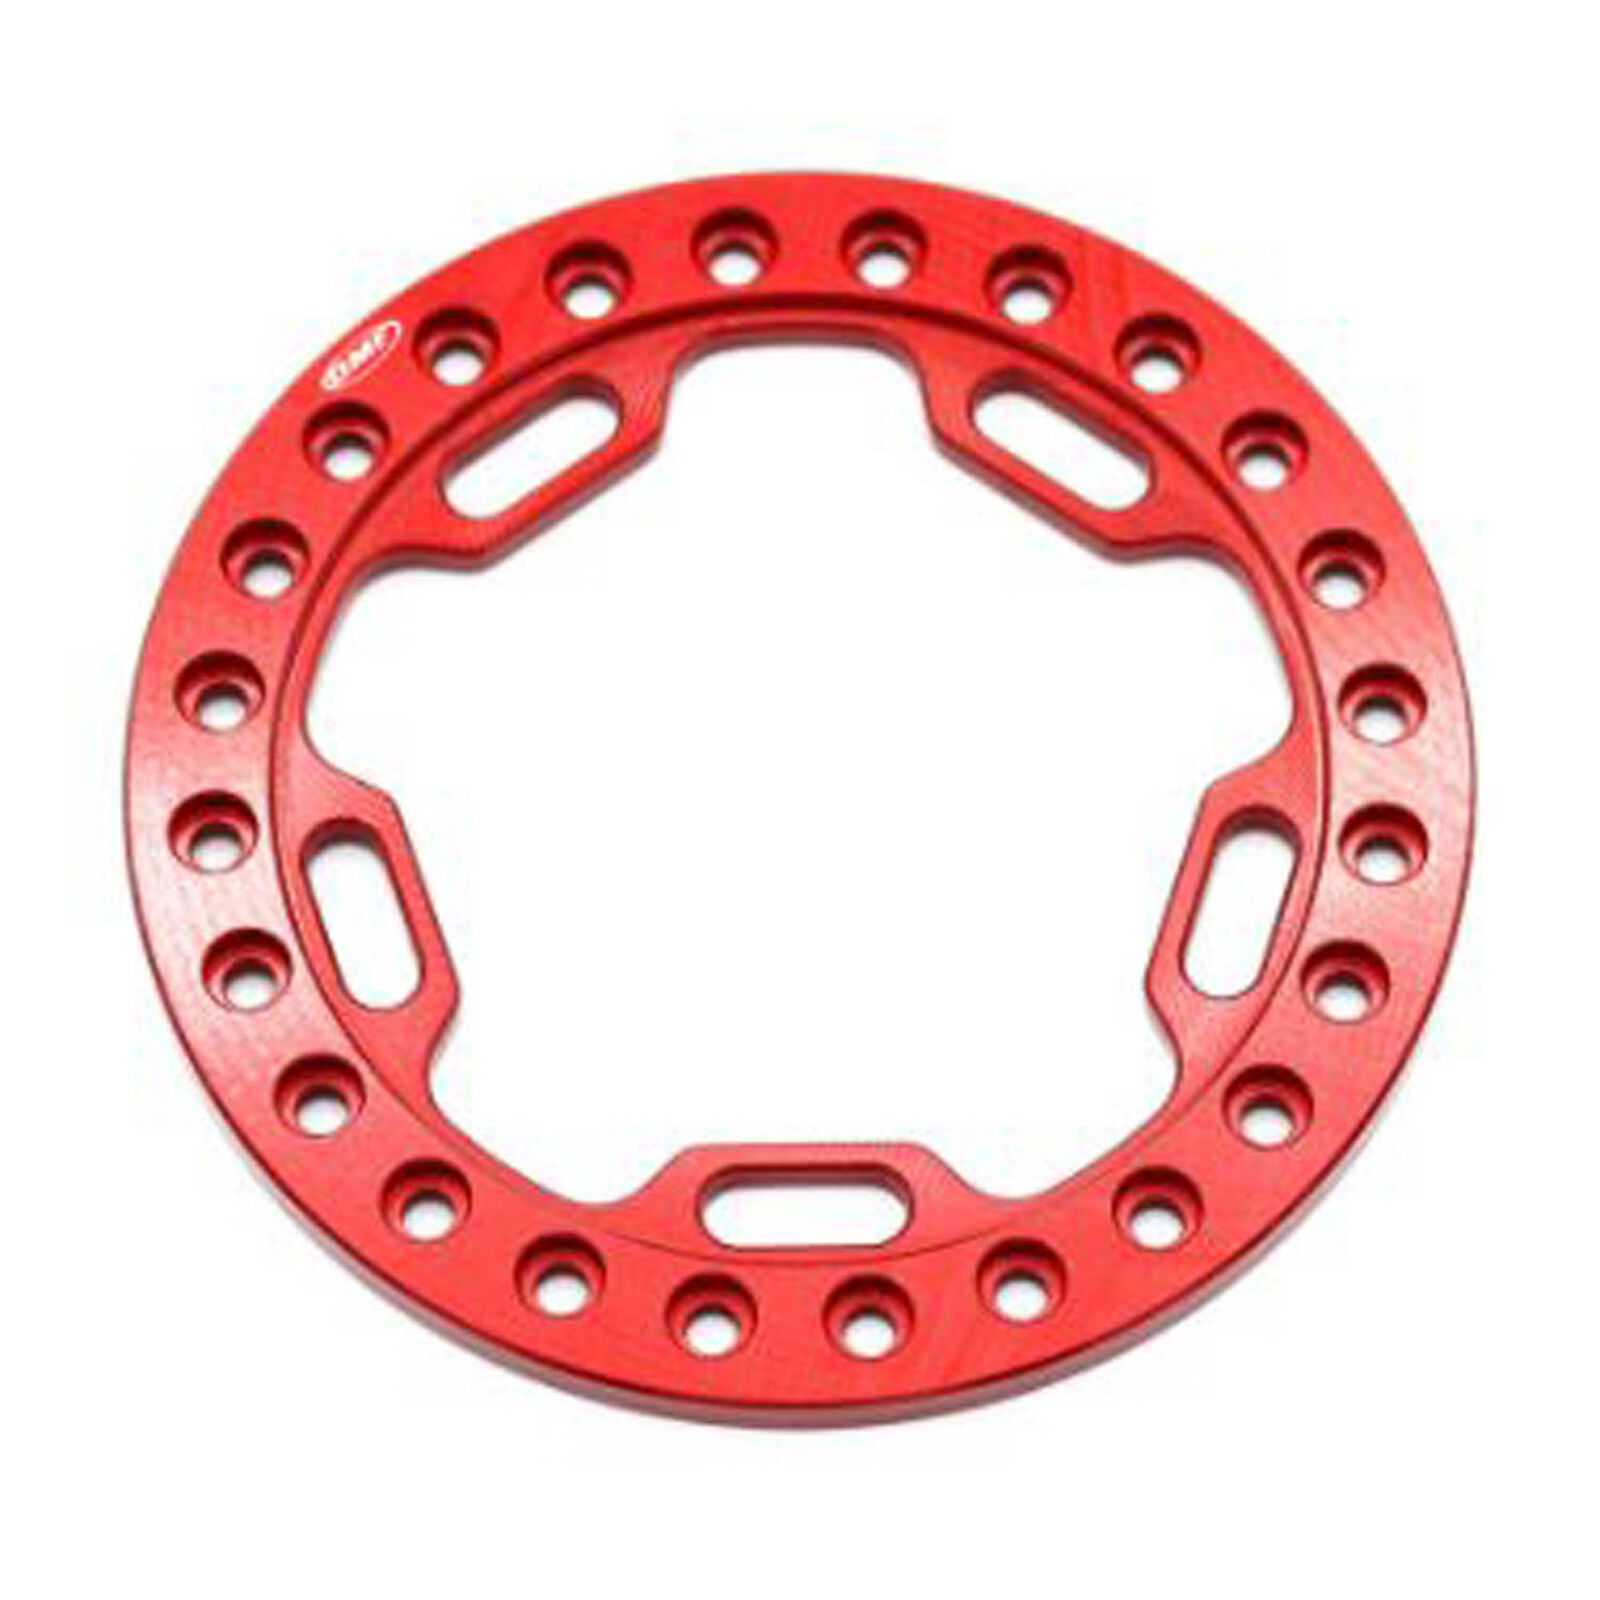 OMF 1.9 Phase 5 Beadlock Red Anodized